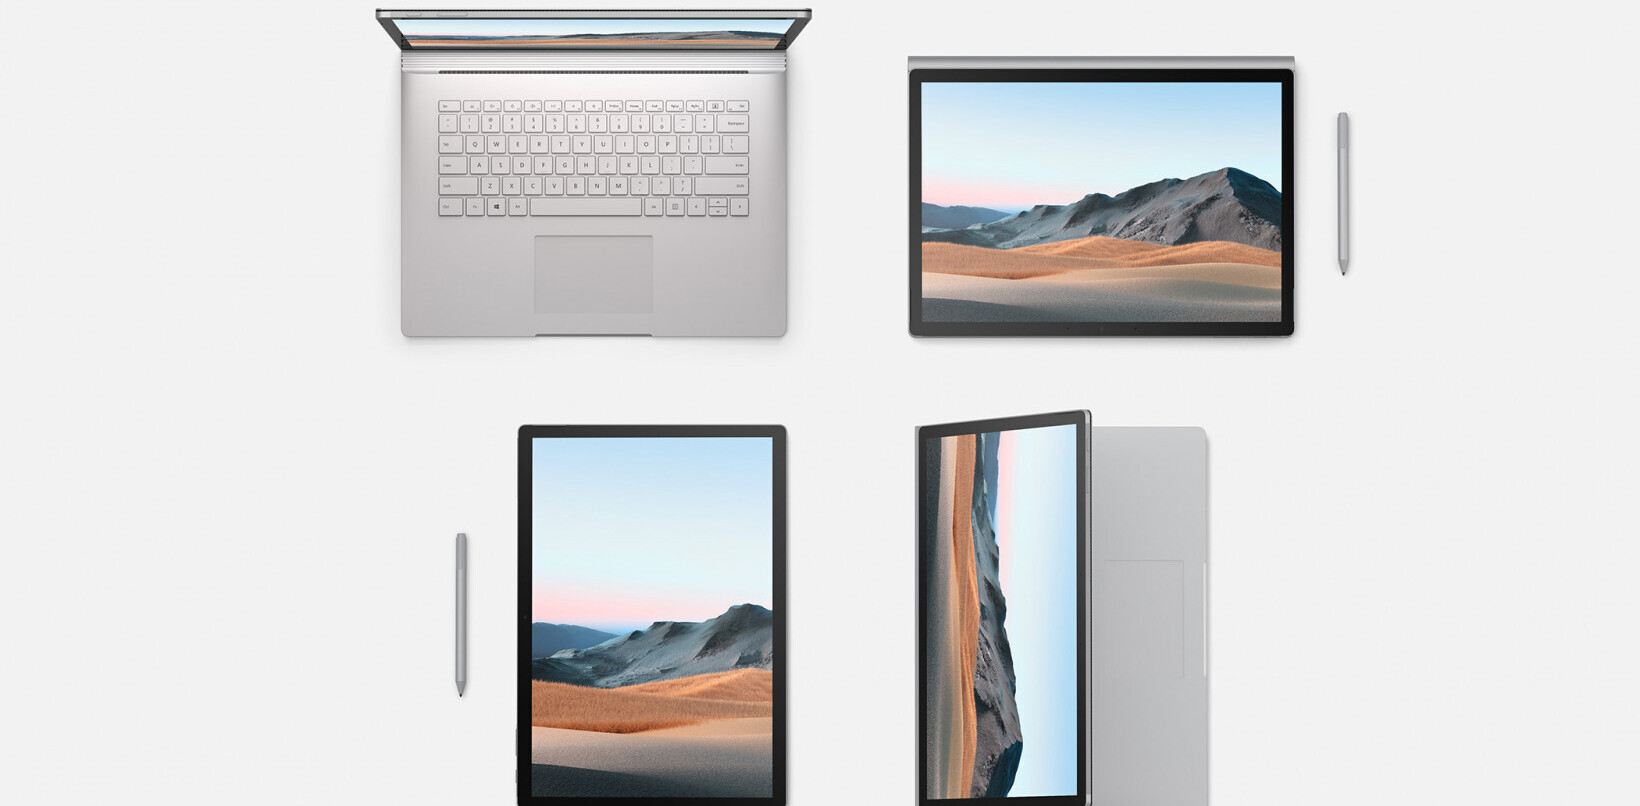 Microsoft announces Surface Book 3 with Nvidia RTX Quadro graphics and Intel’s latest